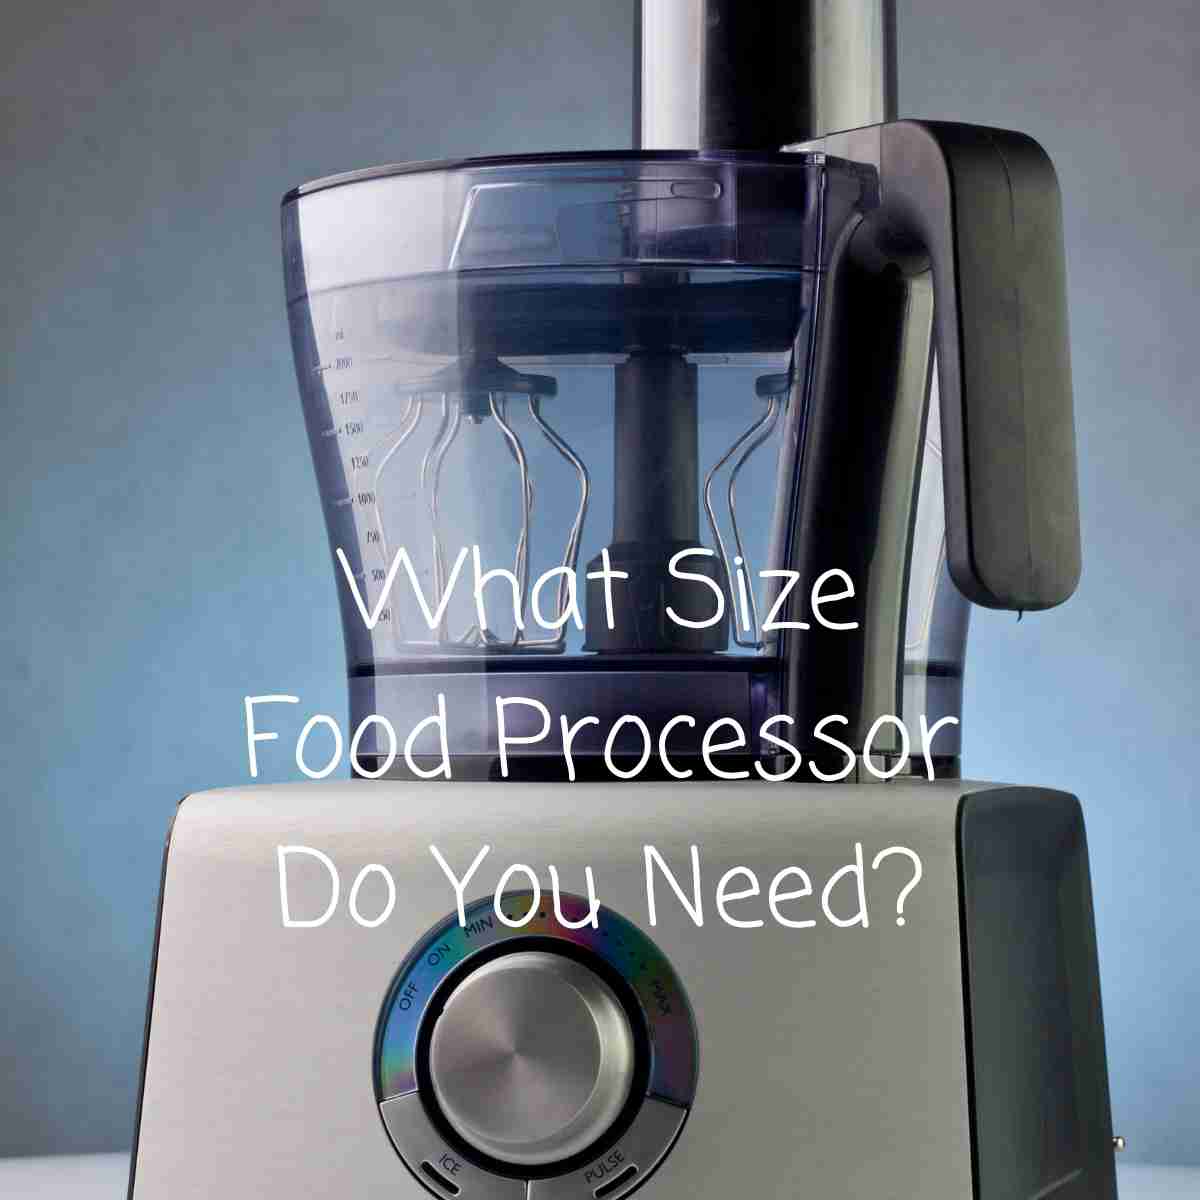 What Size Food Processor Do You Need?